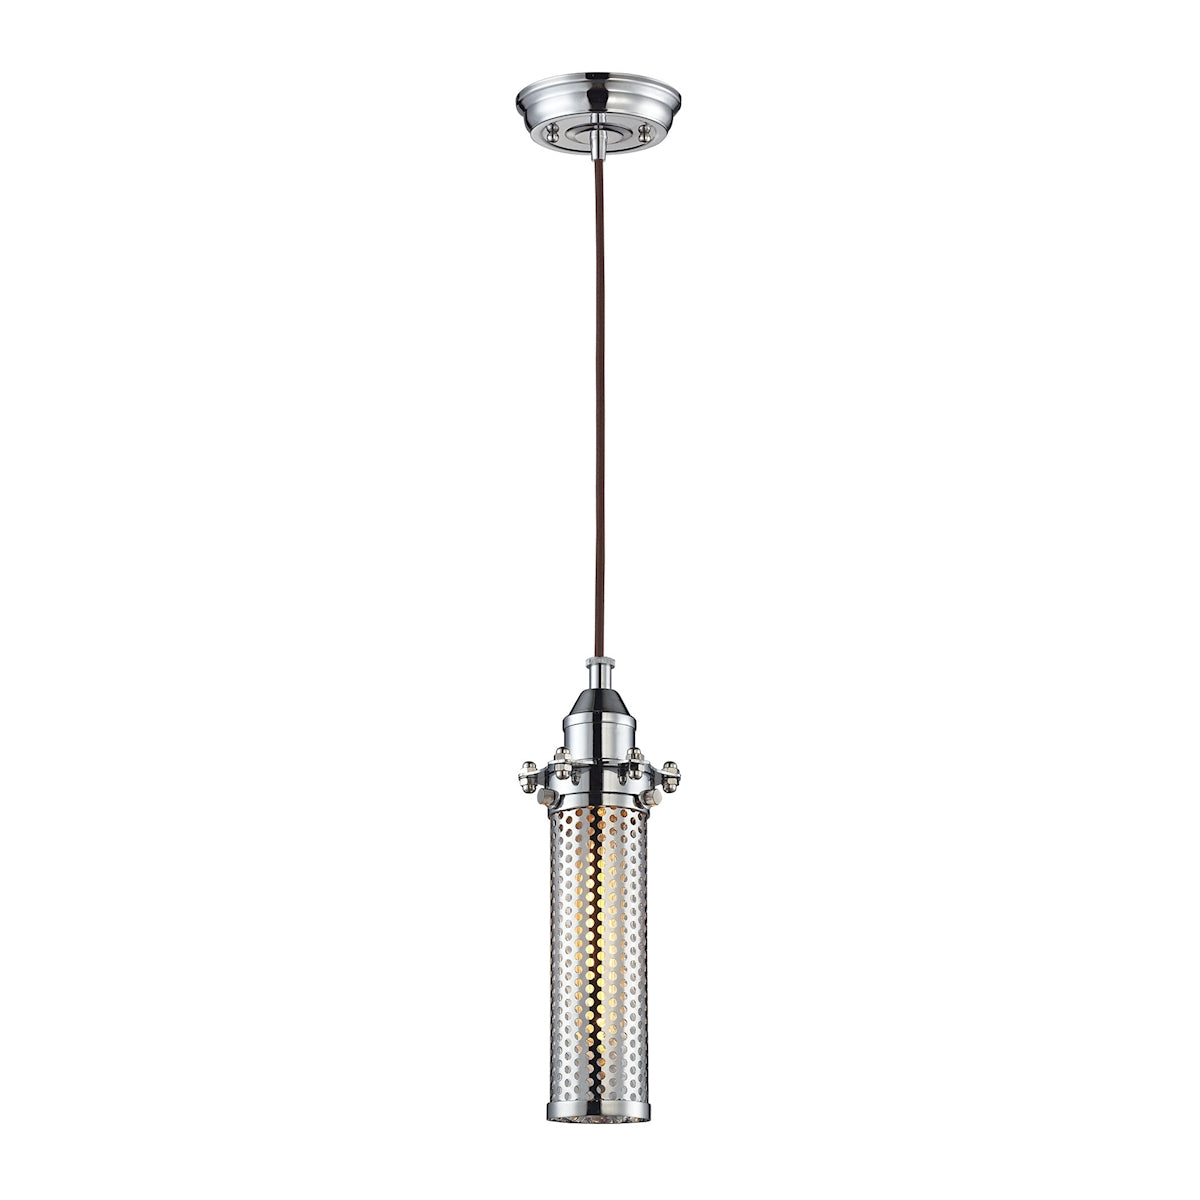 ELK Lighting 66315/1 - Fulton 4" Wide 1-Light Mini Pendant in Polished Chrome with Perforated Metal